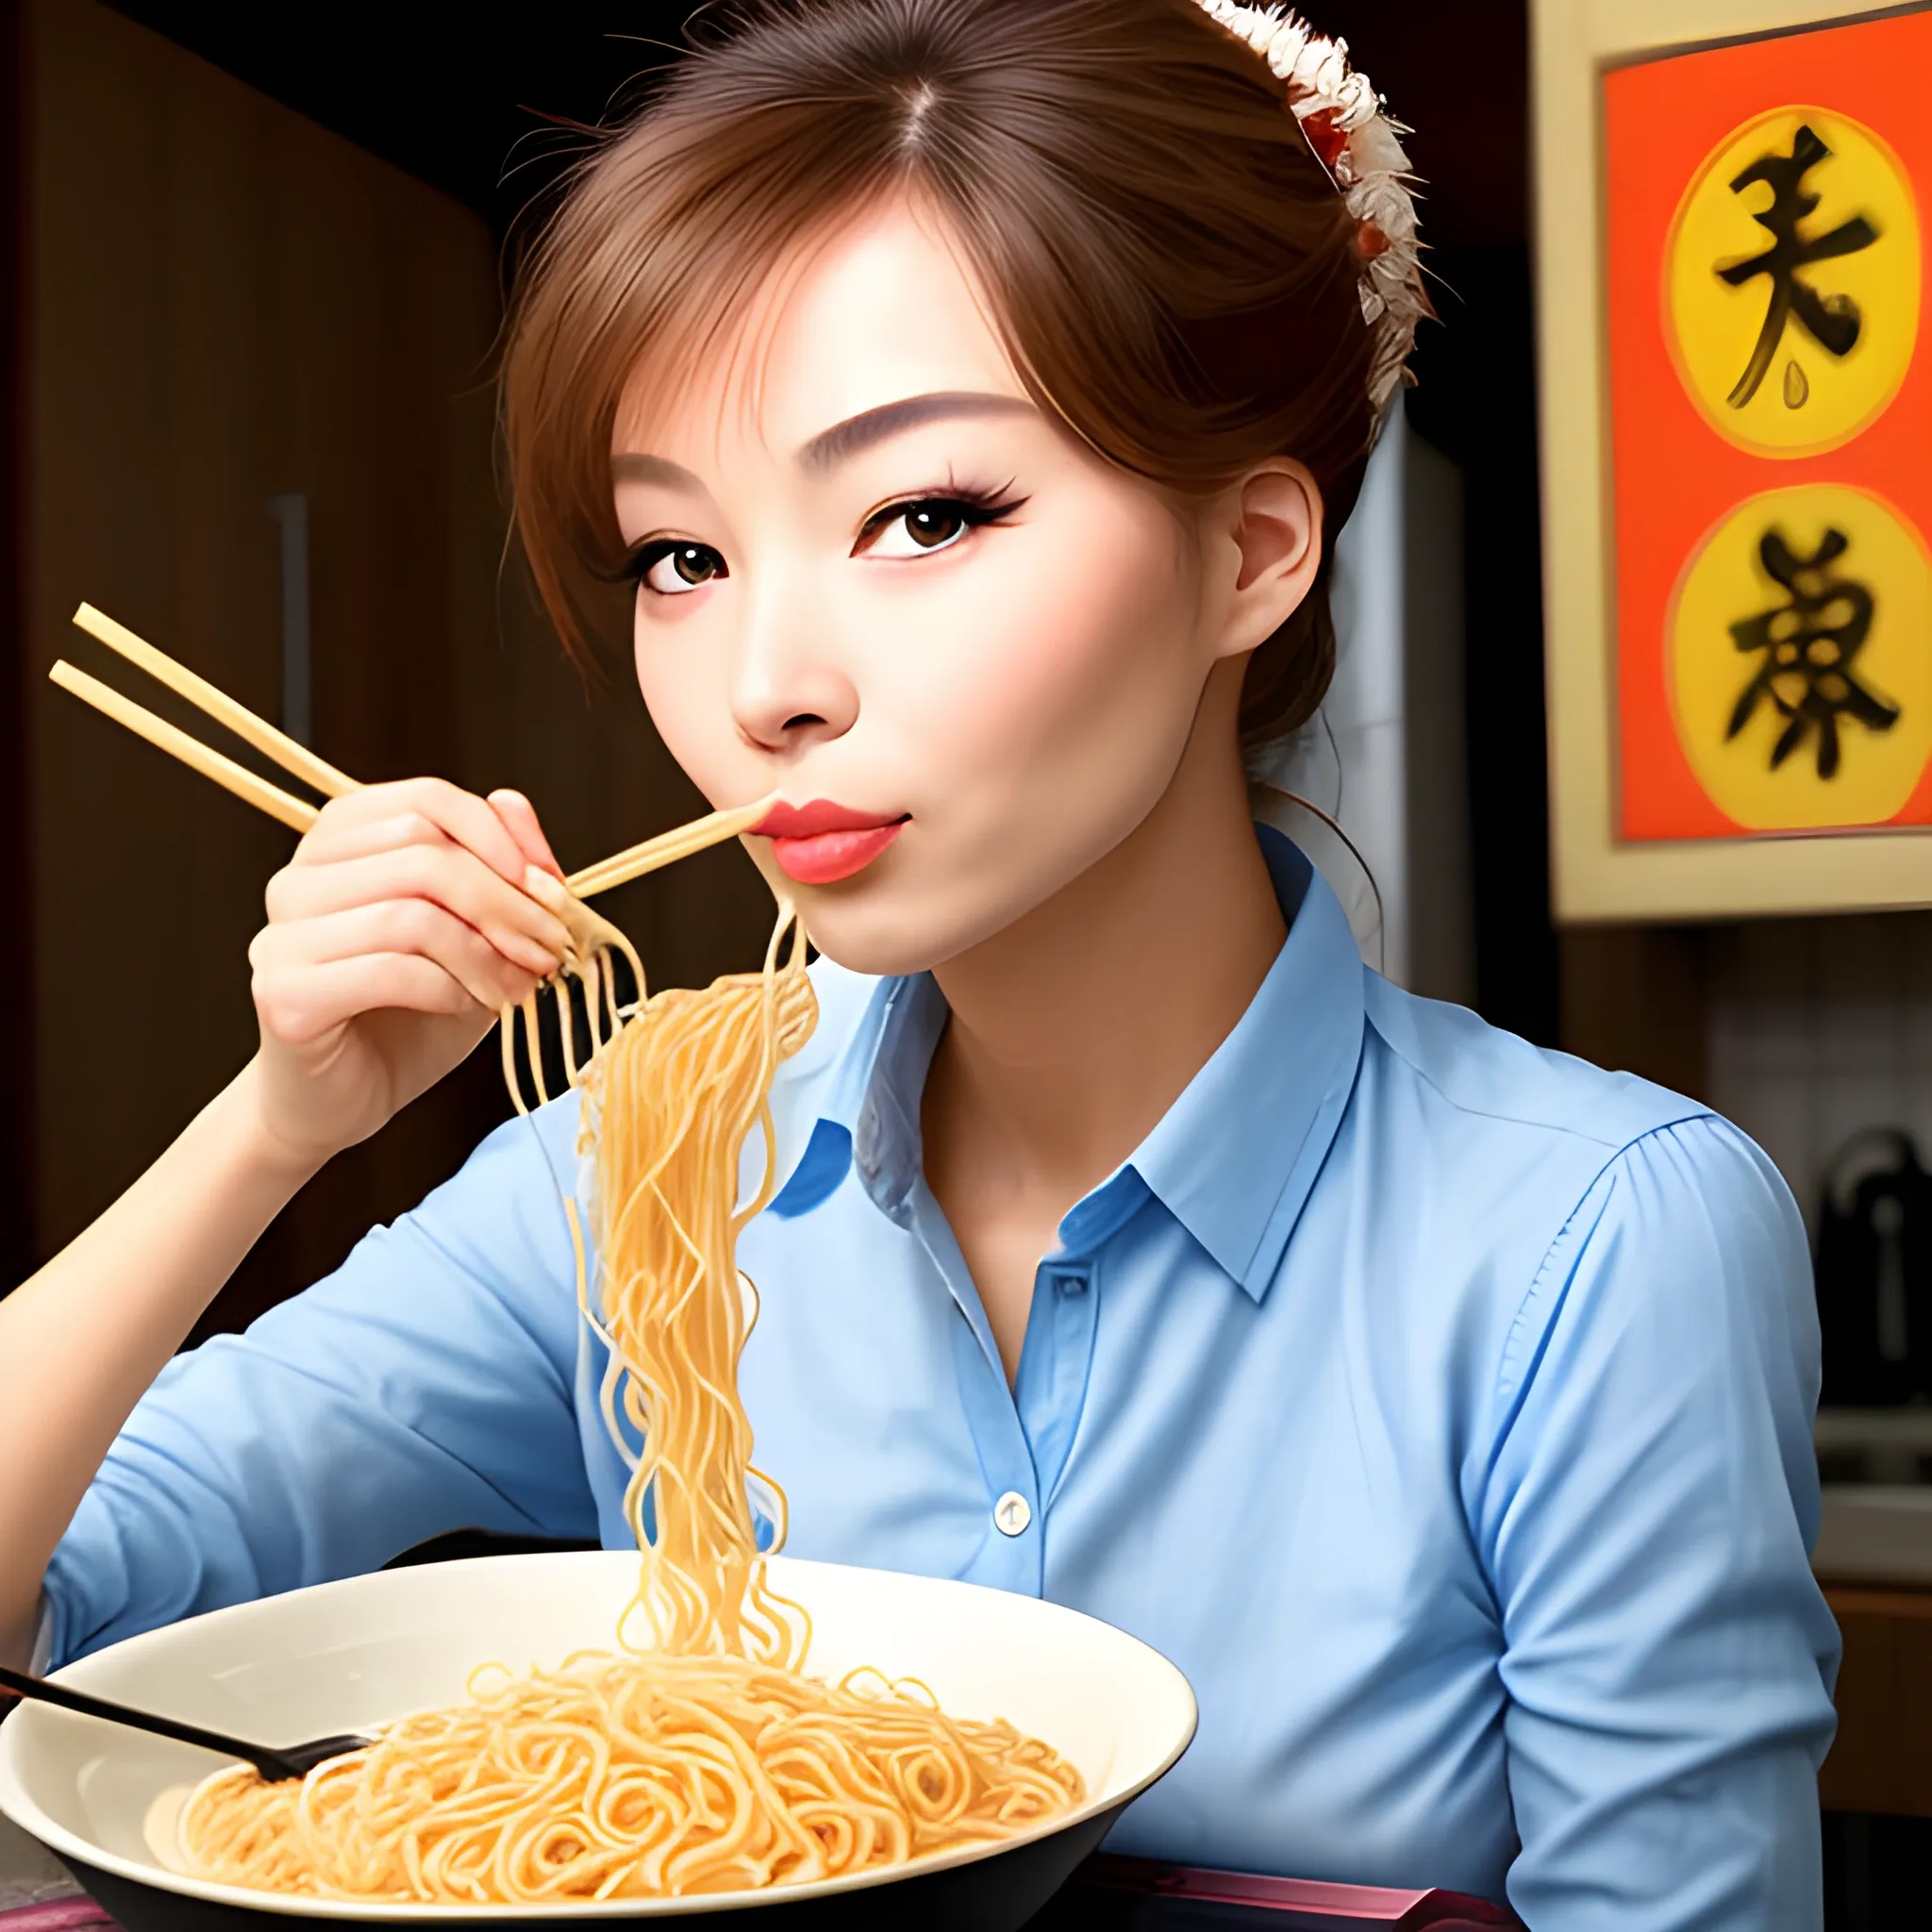 Beautiful lady eating noodles